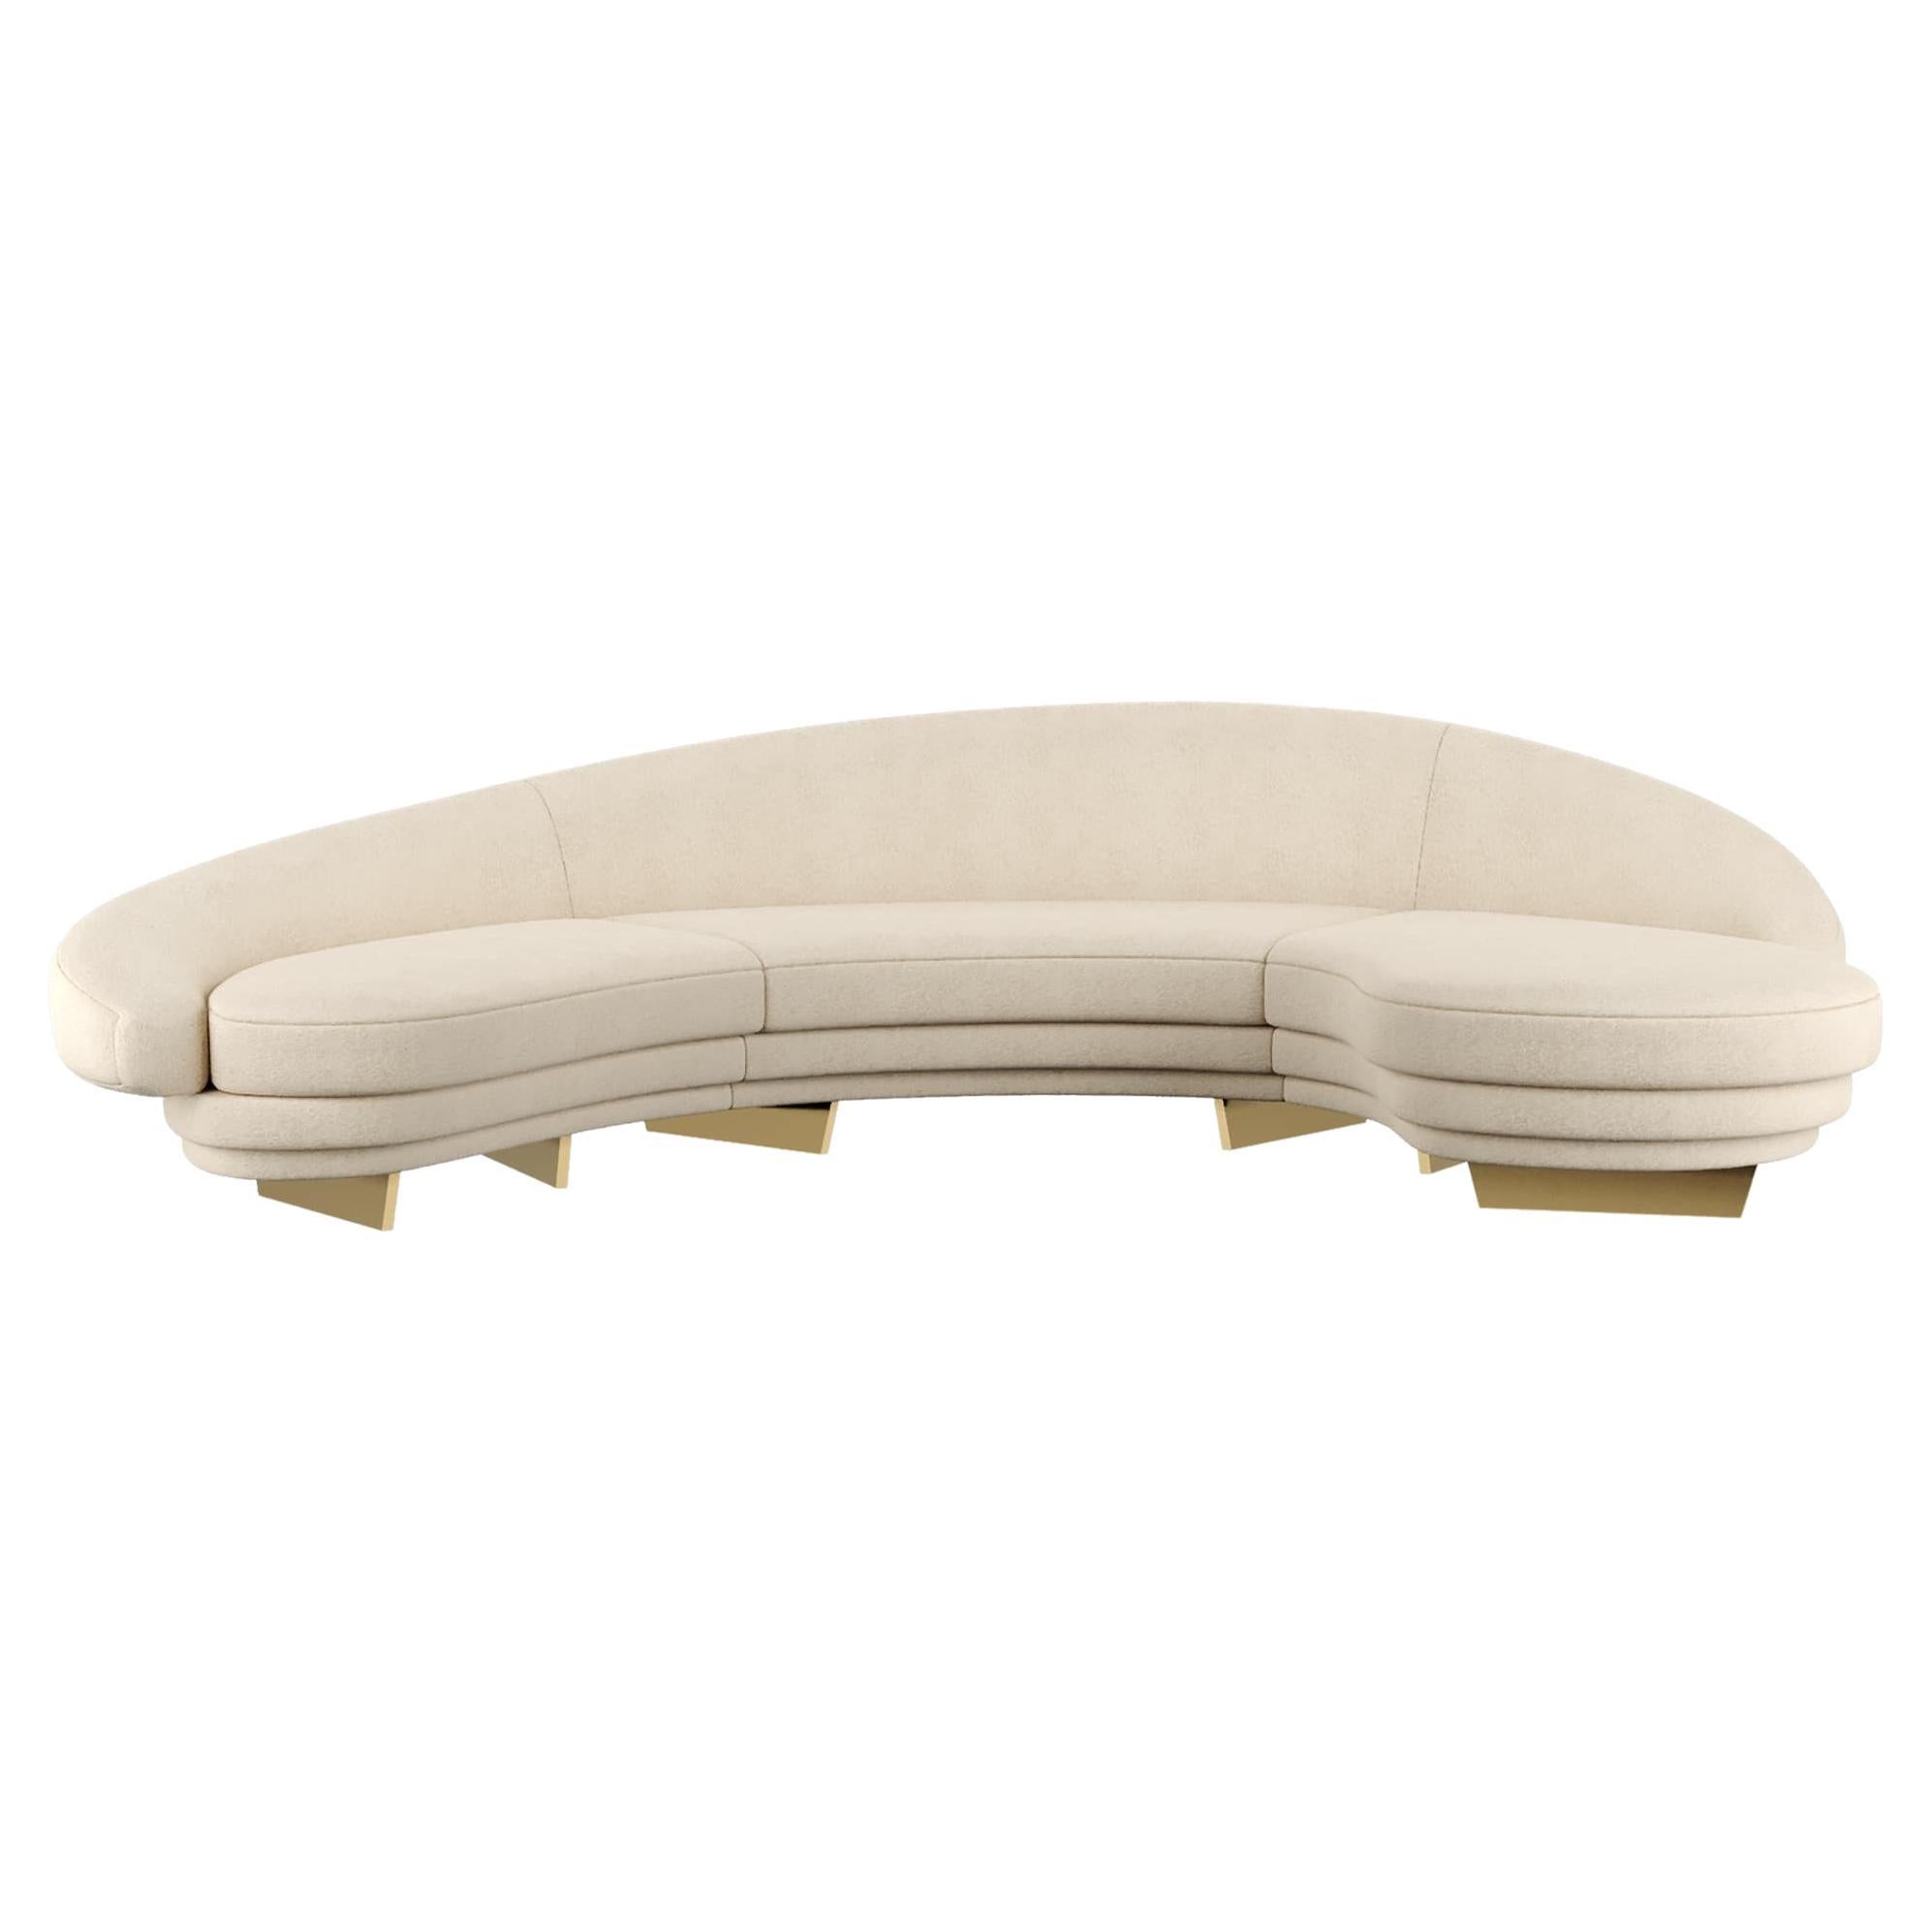 Modern curved serpentine sofa in beige velvet w gold & wood details

Giulia Sofa Nude is a modern mid-century style sofa. This luxury sofa promises to be the absolute protagonist of a modern living room project. Its mid-century style inspiration